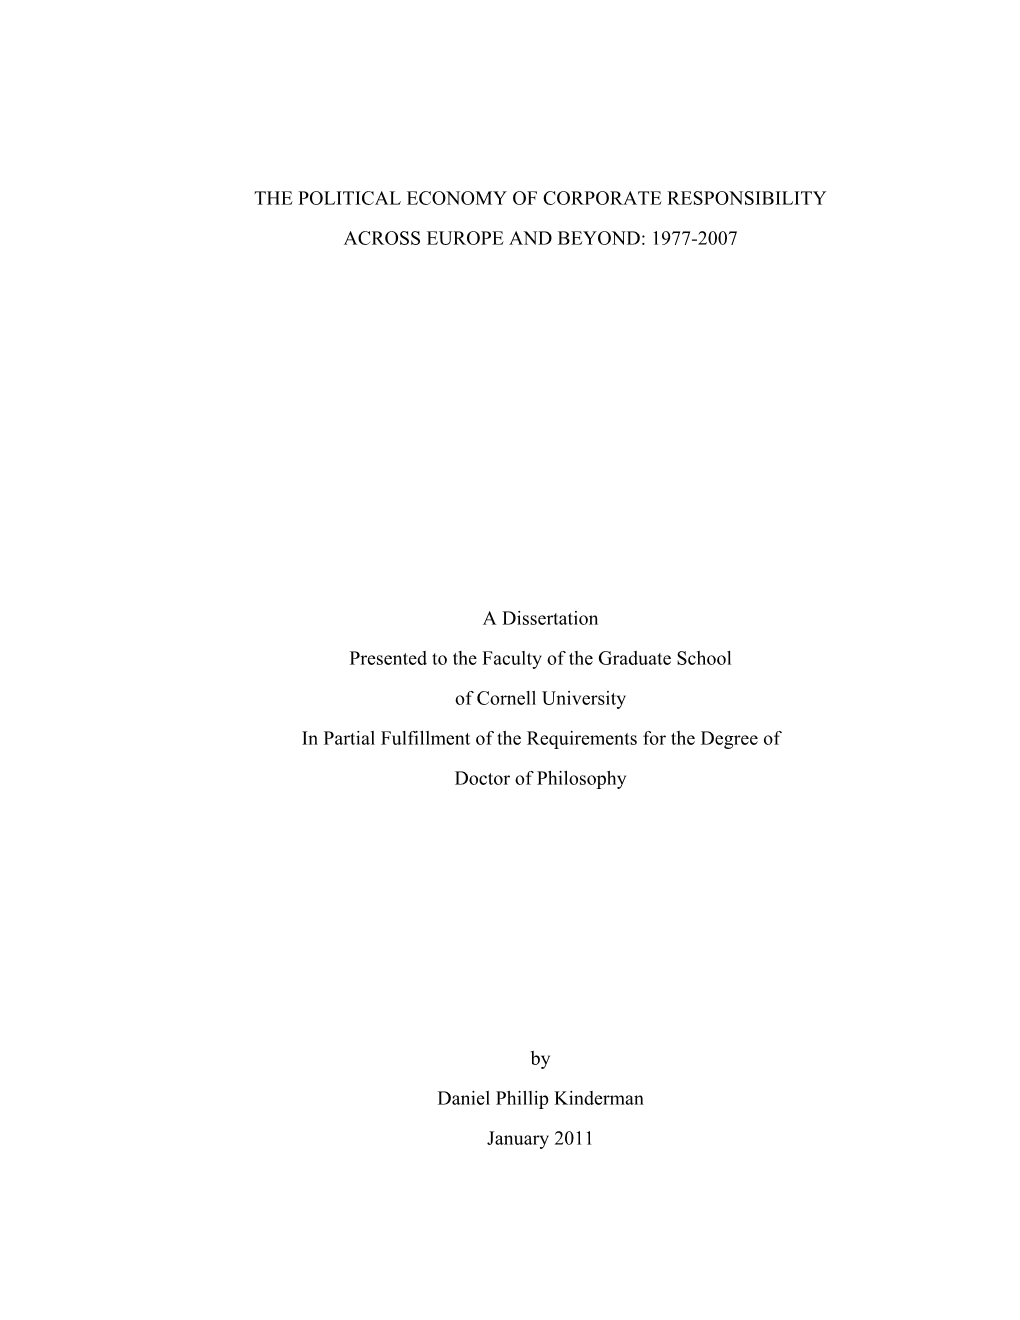 The Political Economy of Corporate Responsibility Across Europe and Beyond: 1977-2007